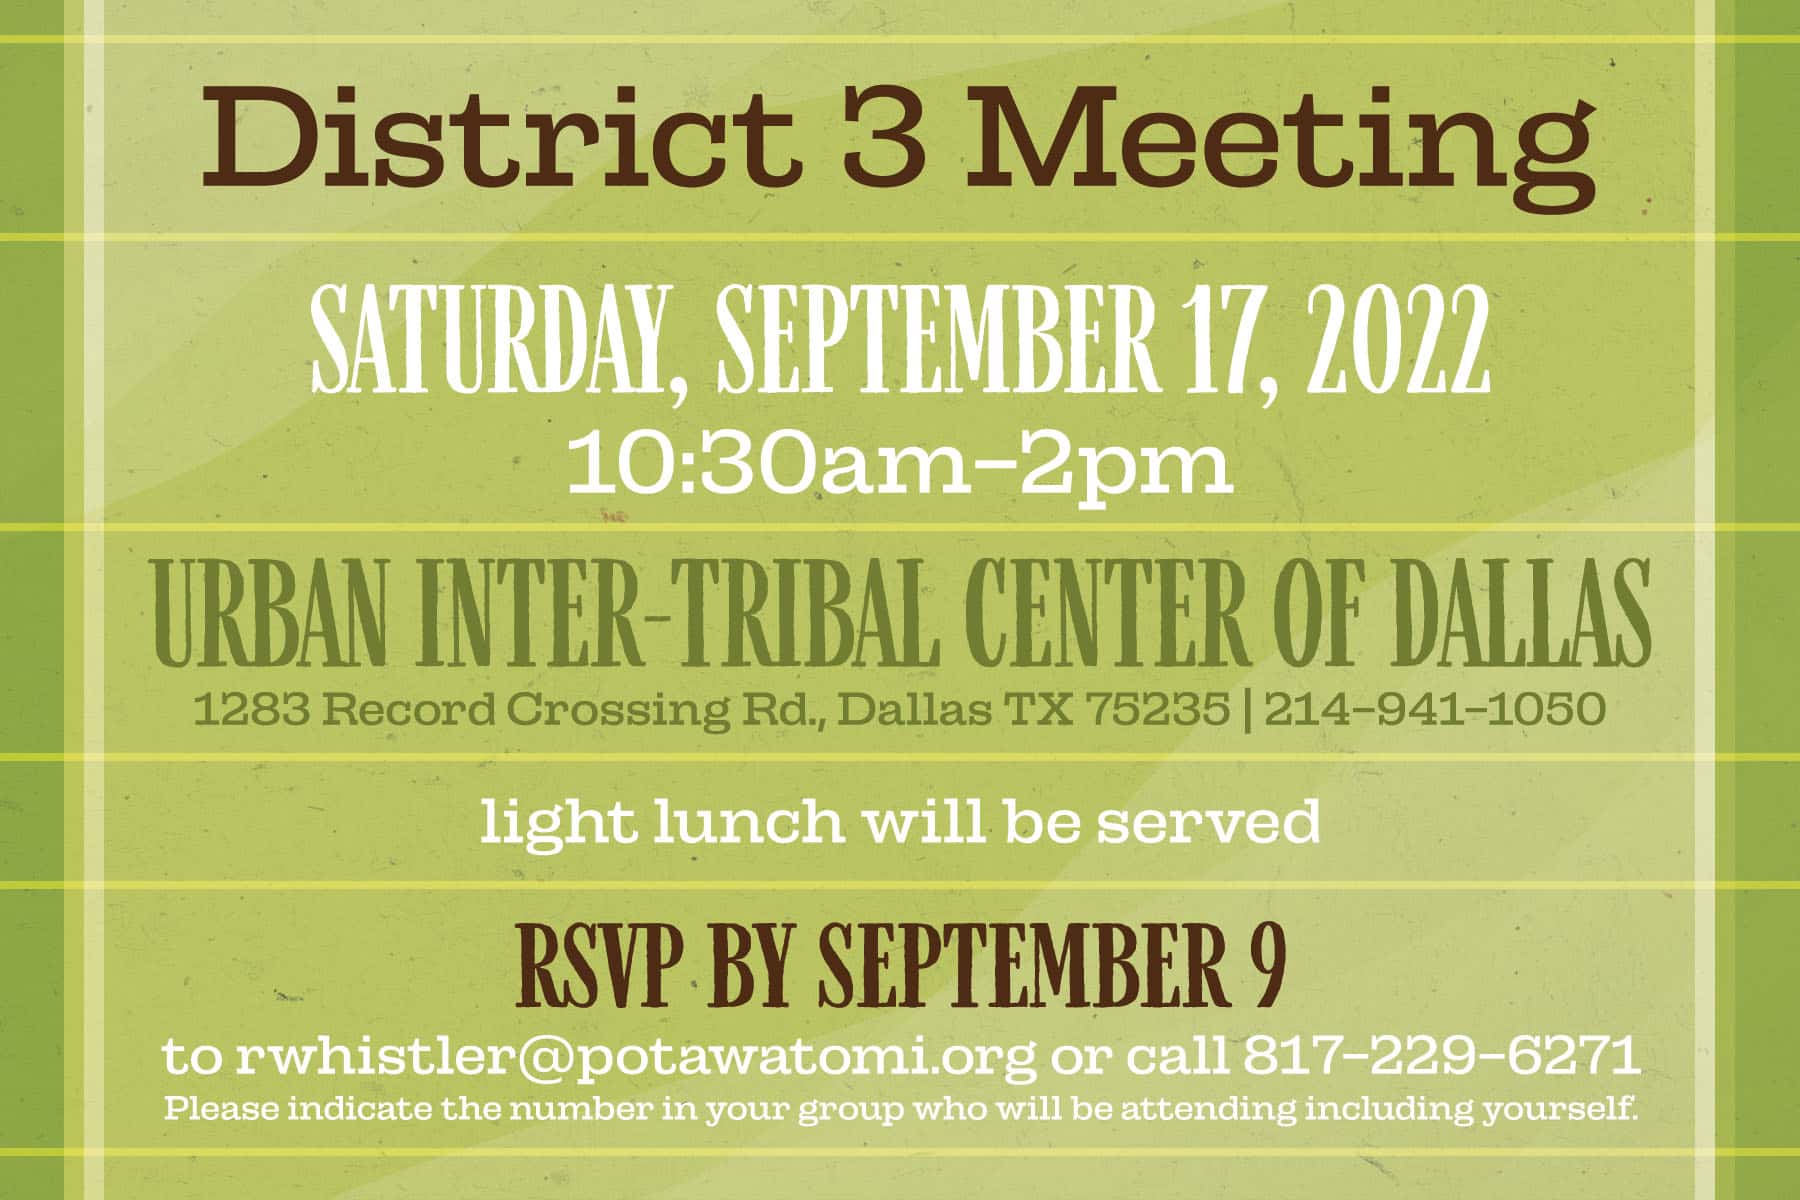 A green postcard inviting attendees to the Citizen Potawatomi Nation District 3 Meeting on September 17.